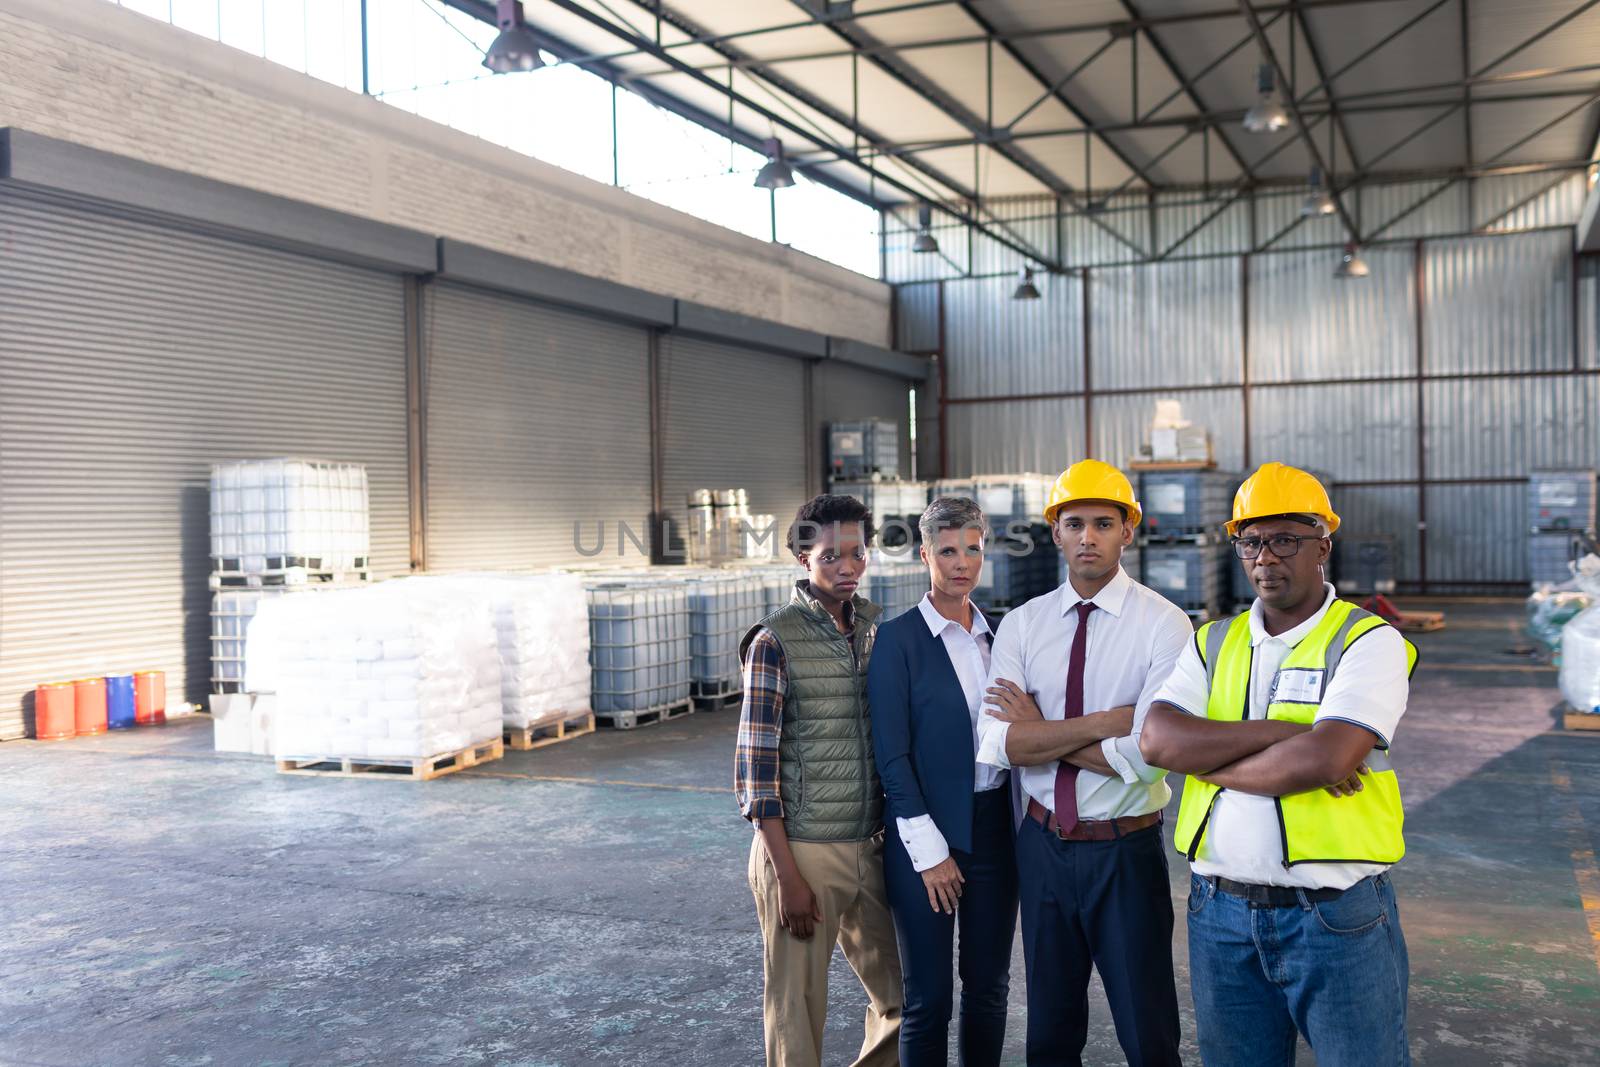 Portrait of diverse male and female staffs standing together in warehouse. This is a freight transportation and distribution warehouse. Industrial and industrial workers concept